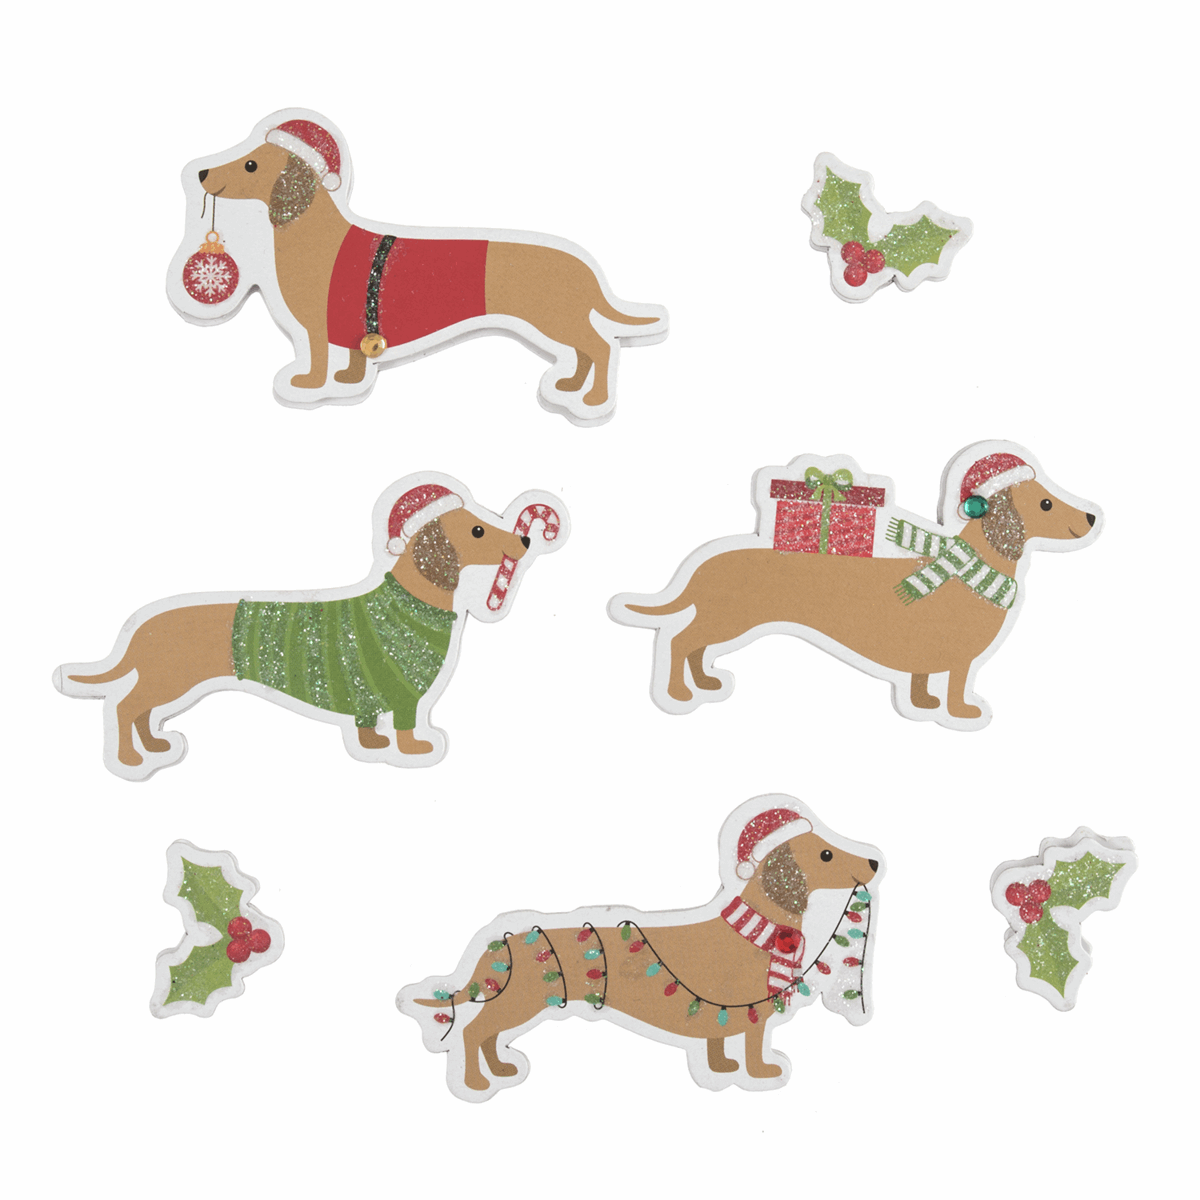 Festive Sausage Dog Stickers - for cards, gift bags or table scatter decorations